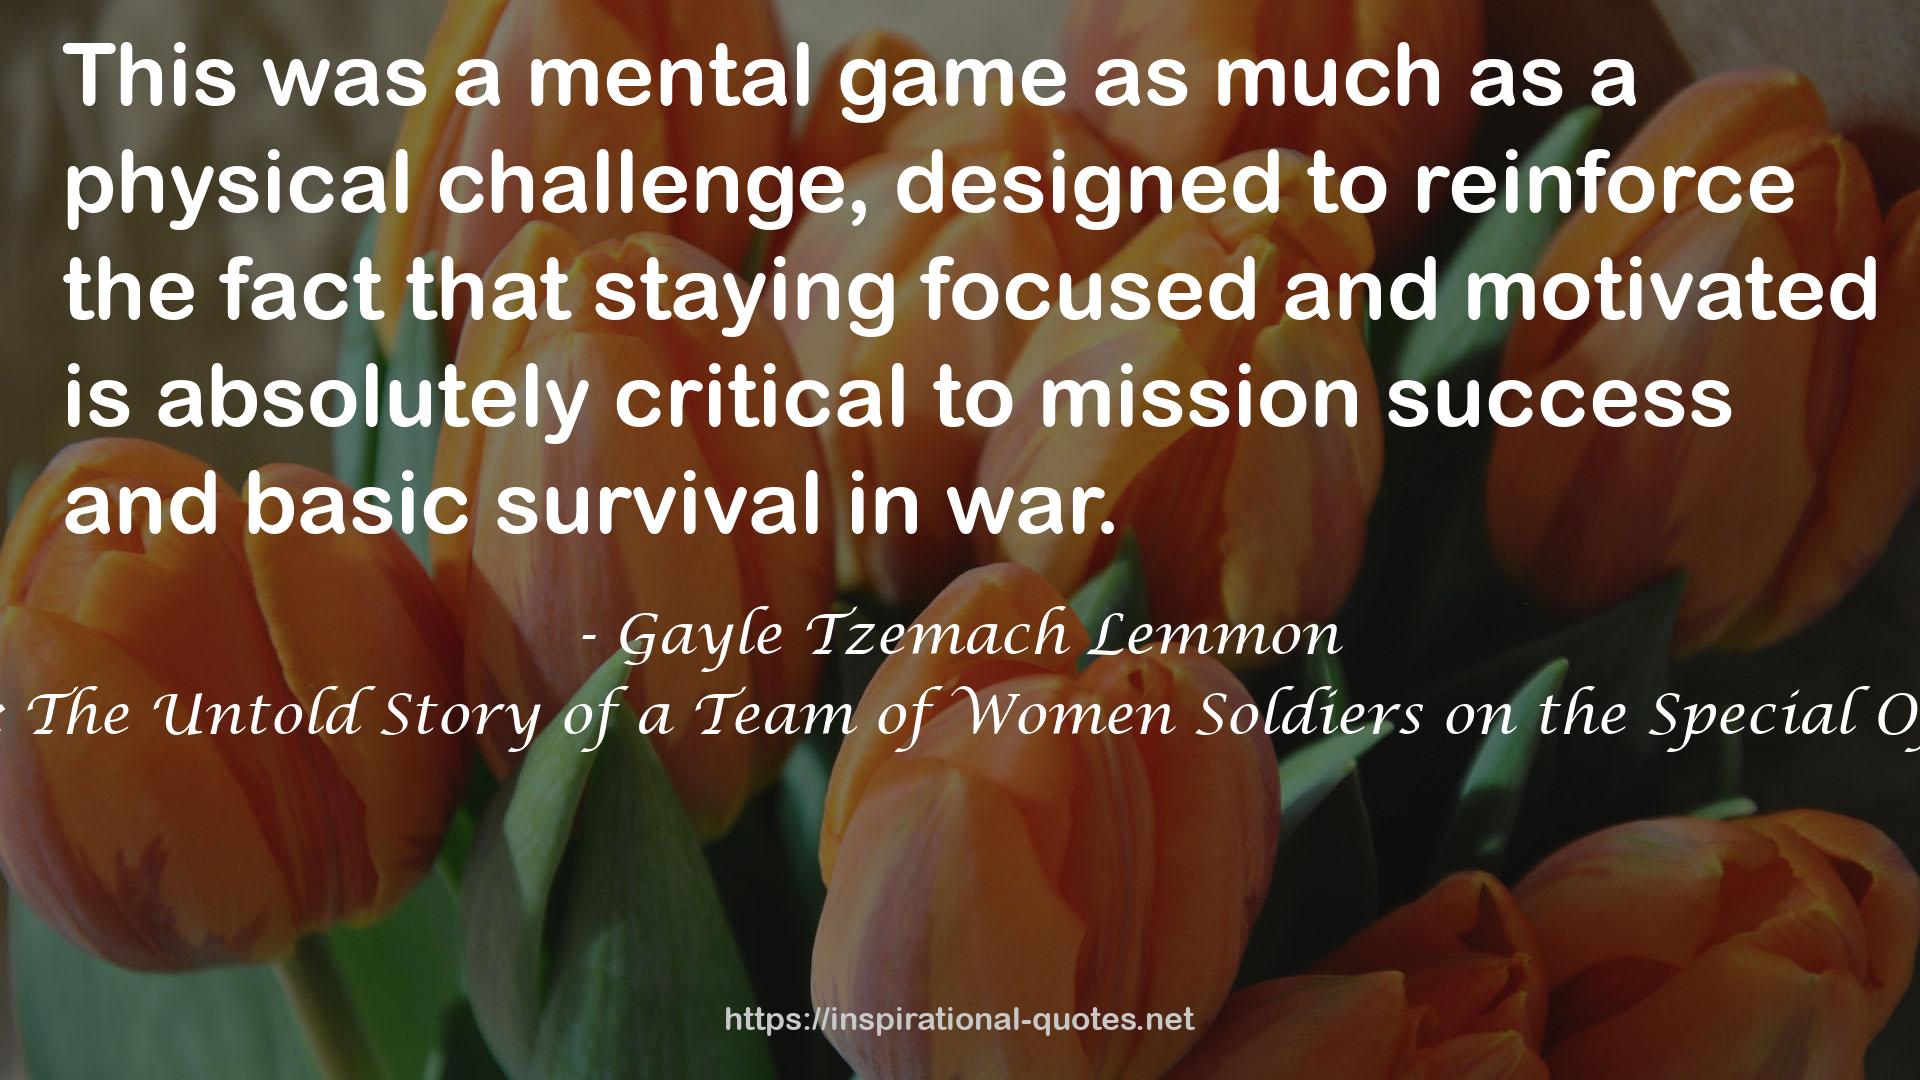 Ashley's War: The Untold Story of a Team of Women Soldiers on the Special Ops Battlefield QUOTES